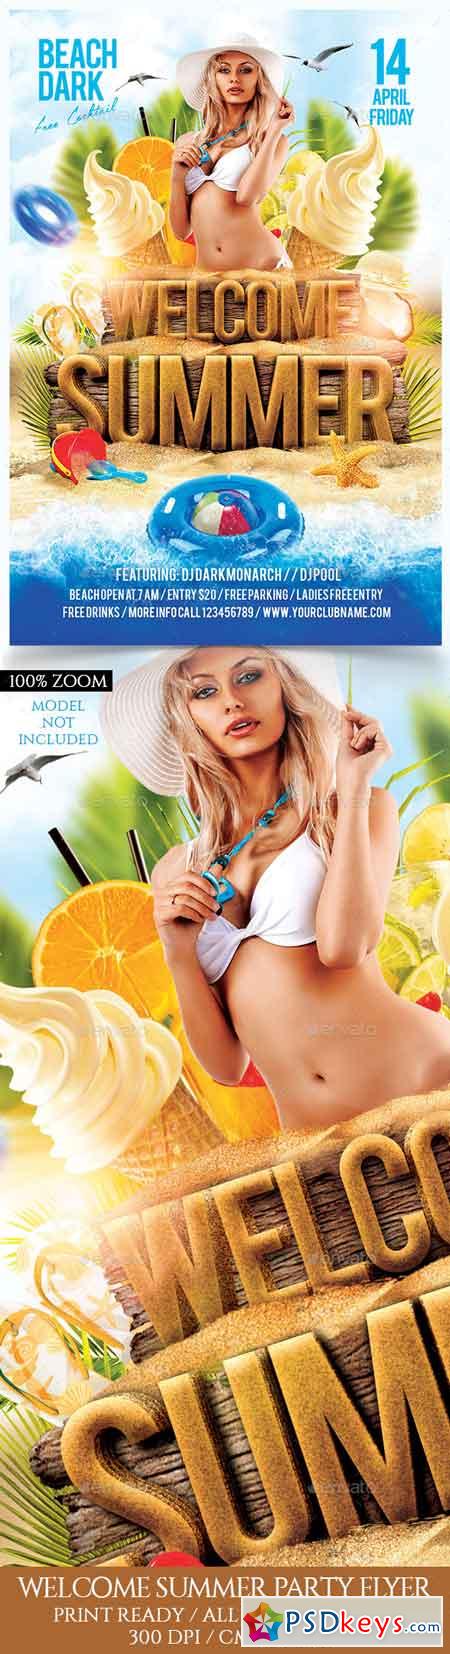 Welcome Summer Party Flyer Template 16435421